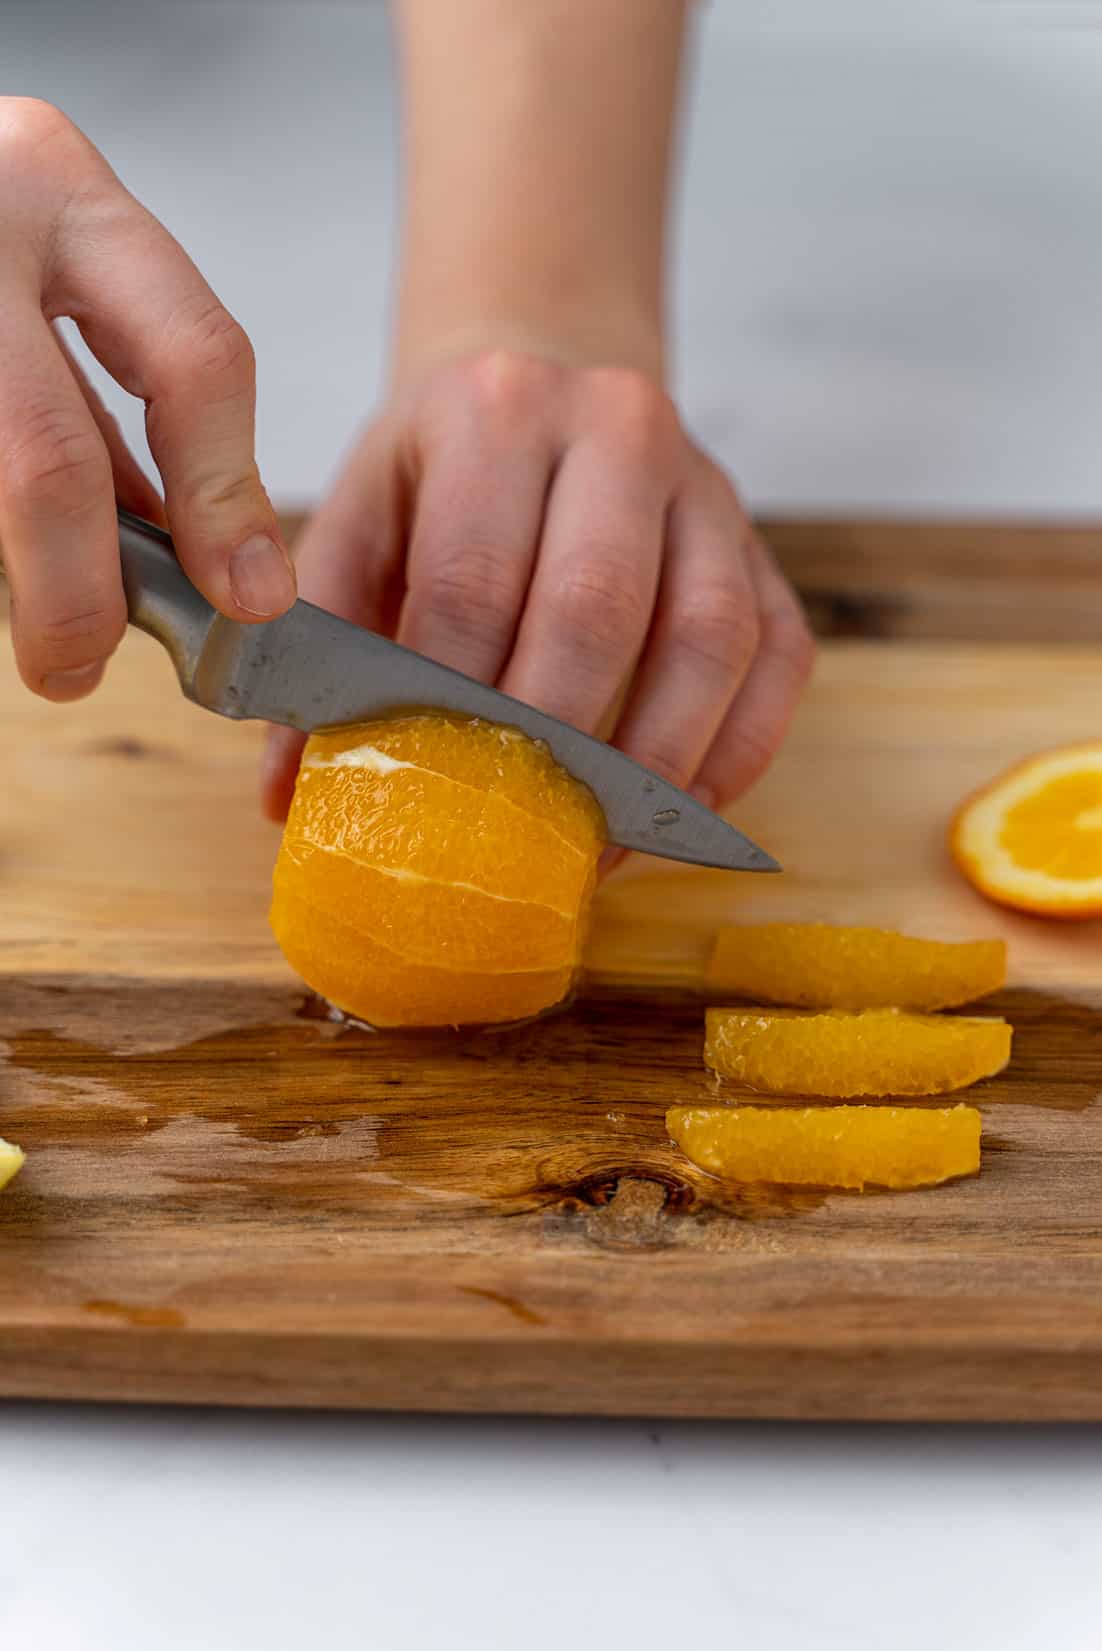 slicing the orange into slices with knife and cutting baord